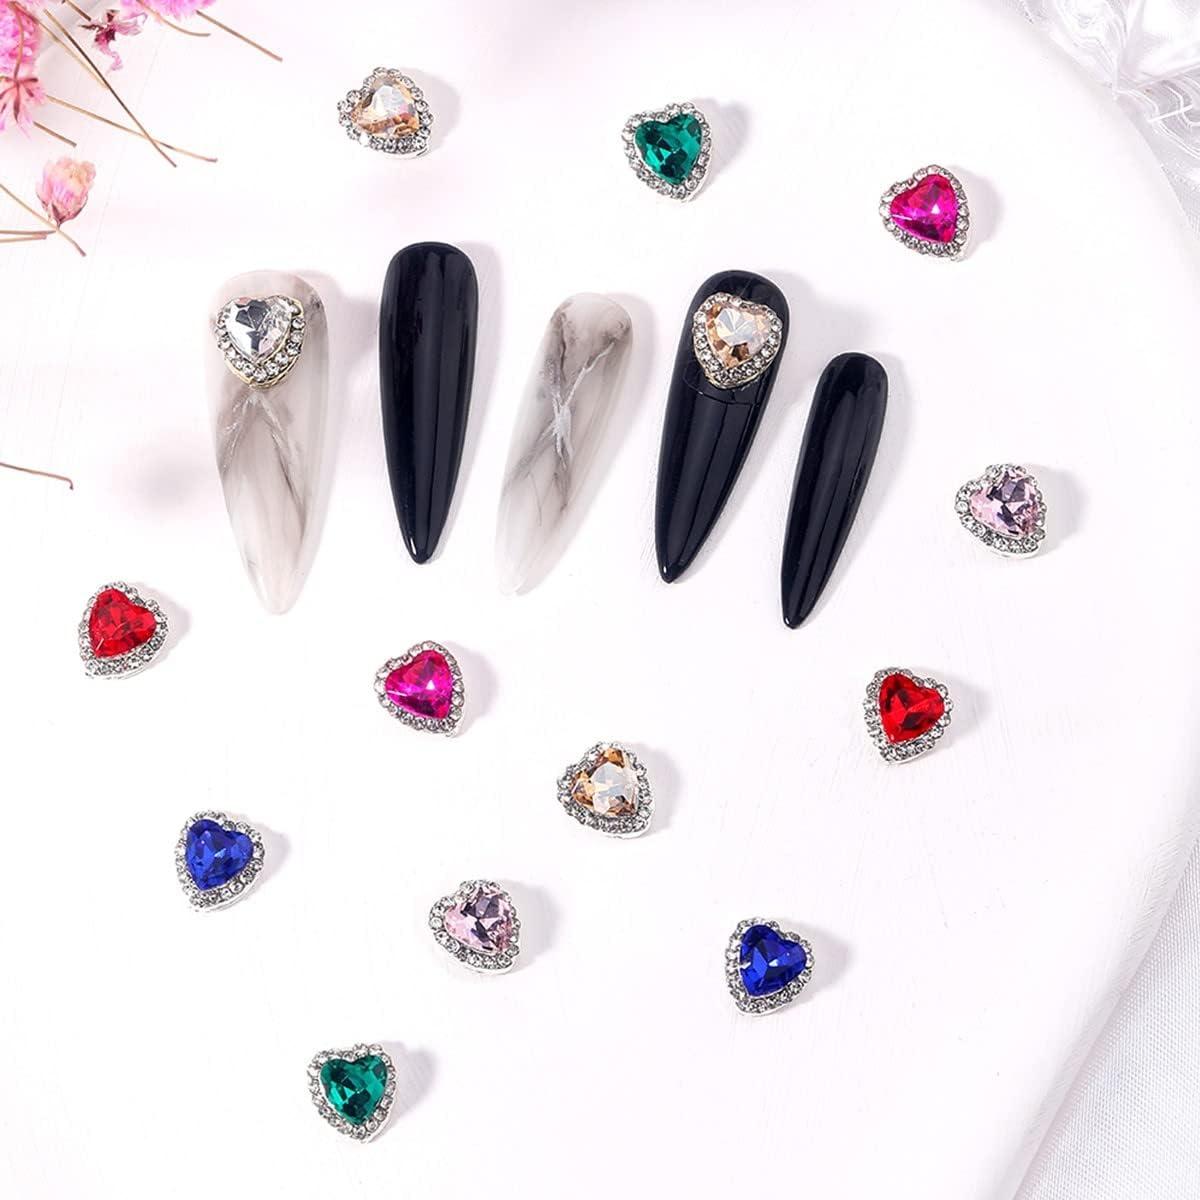 qiipii 30 Pcs Heart Nail Charms for Nails Valentine's Day 3D Heart Nail  Rhinestones Nail Gems 6 Color Love Crystal Diamond Alloy Nail Art Jewelry  Supplies for Acrylic Nails Wedding Crafts Manicure